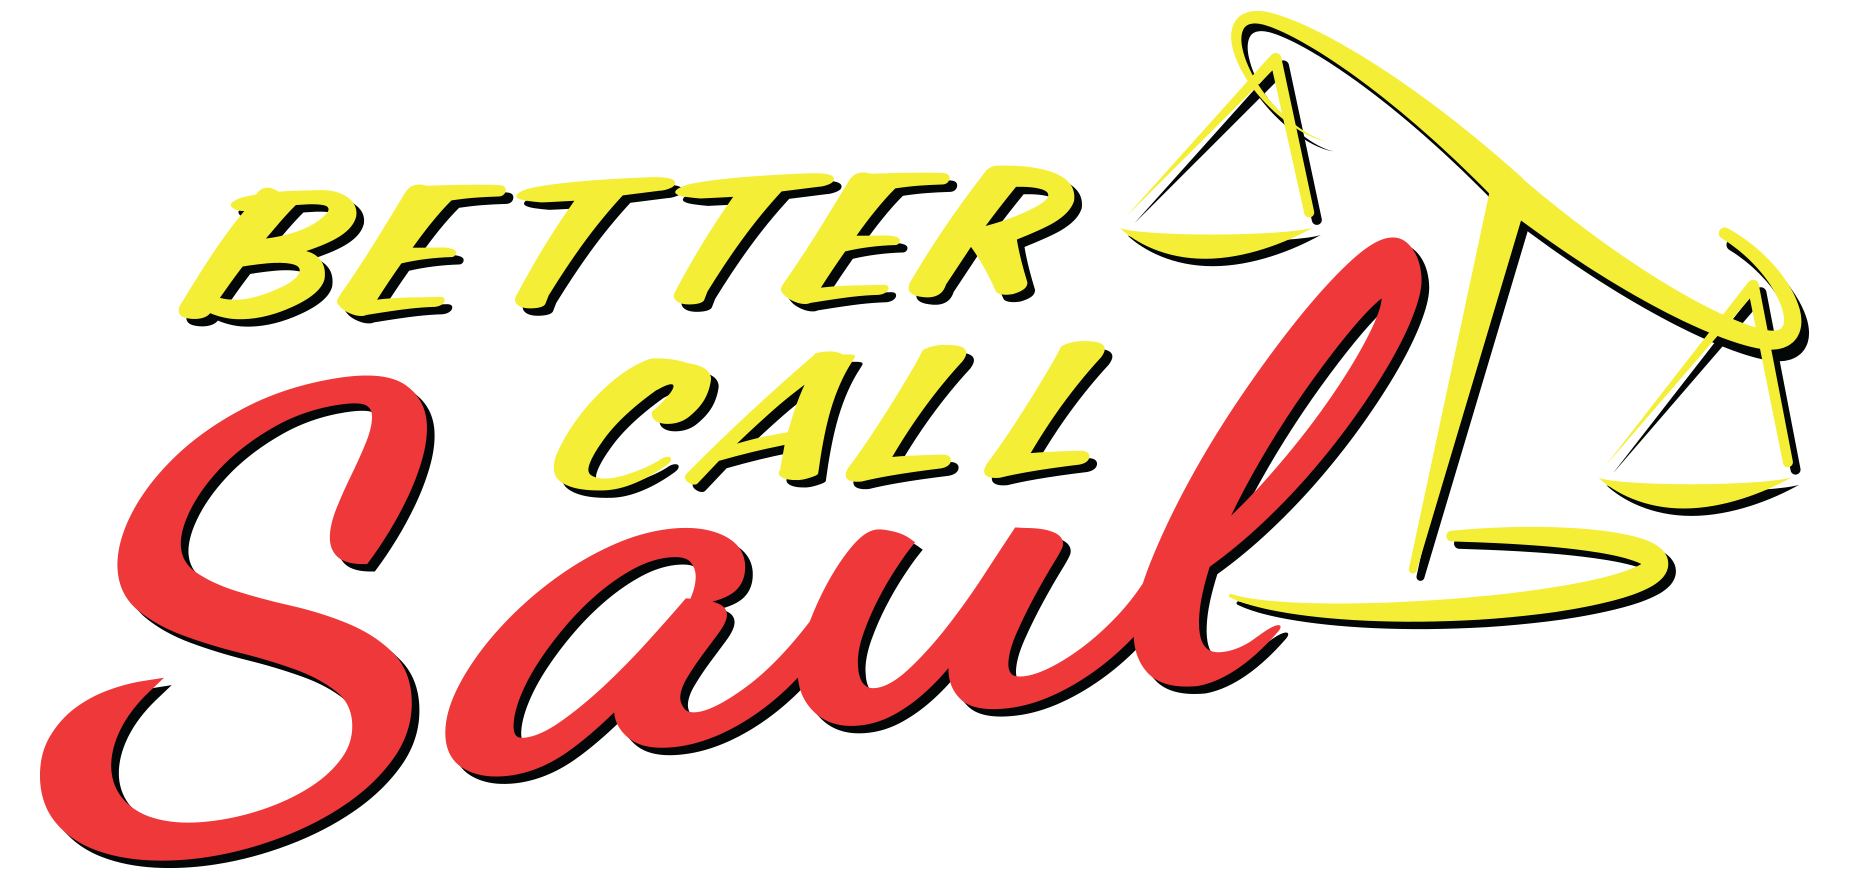 Better Call Saul - Sony Pictures Television, Gran Via Productions